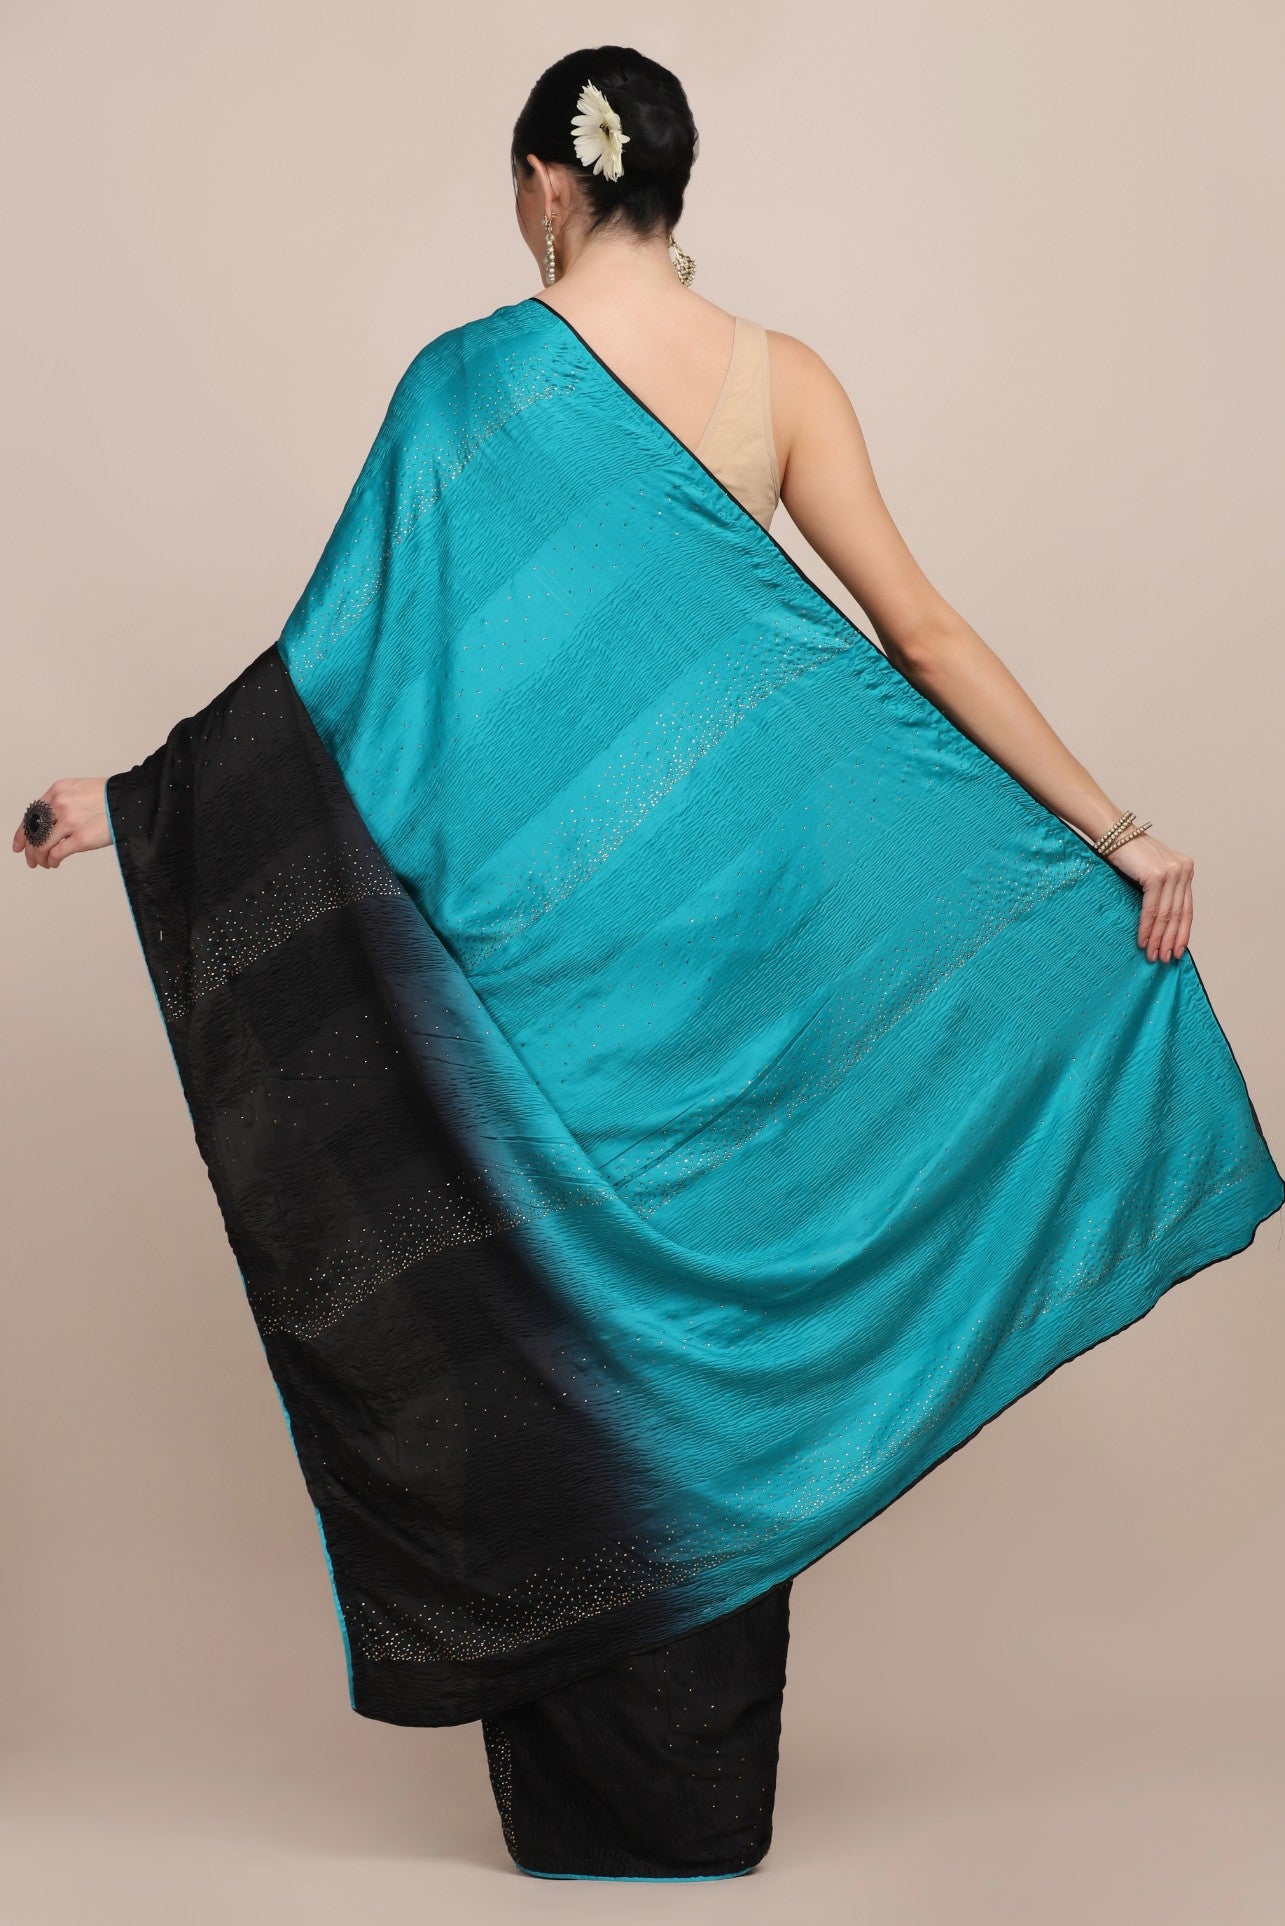 Gorgeous blue color shaded saree